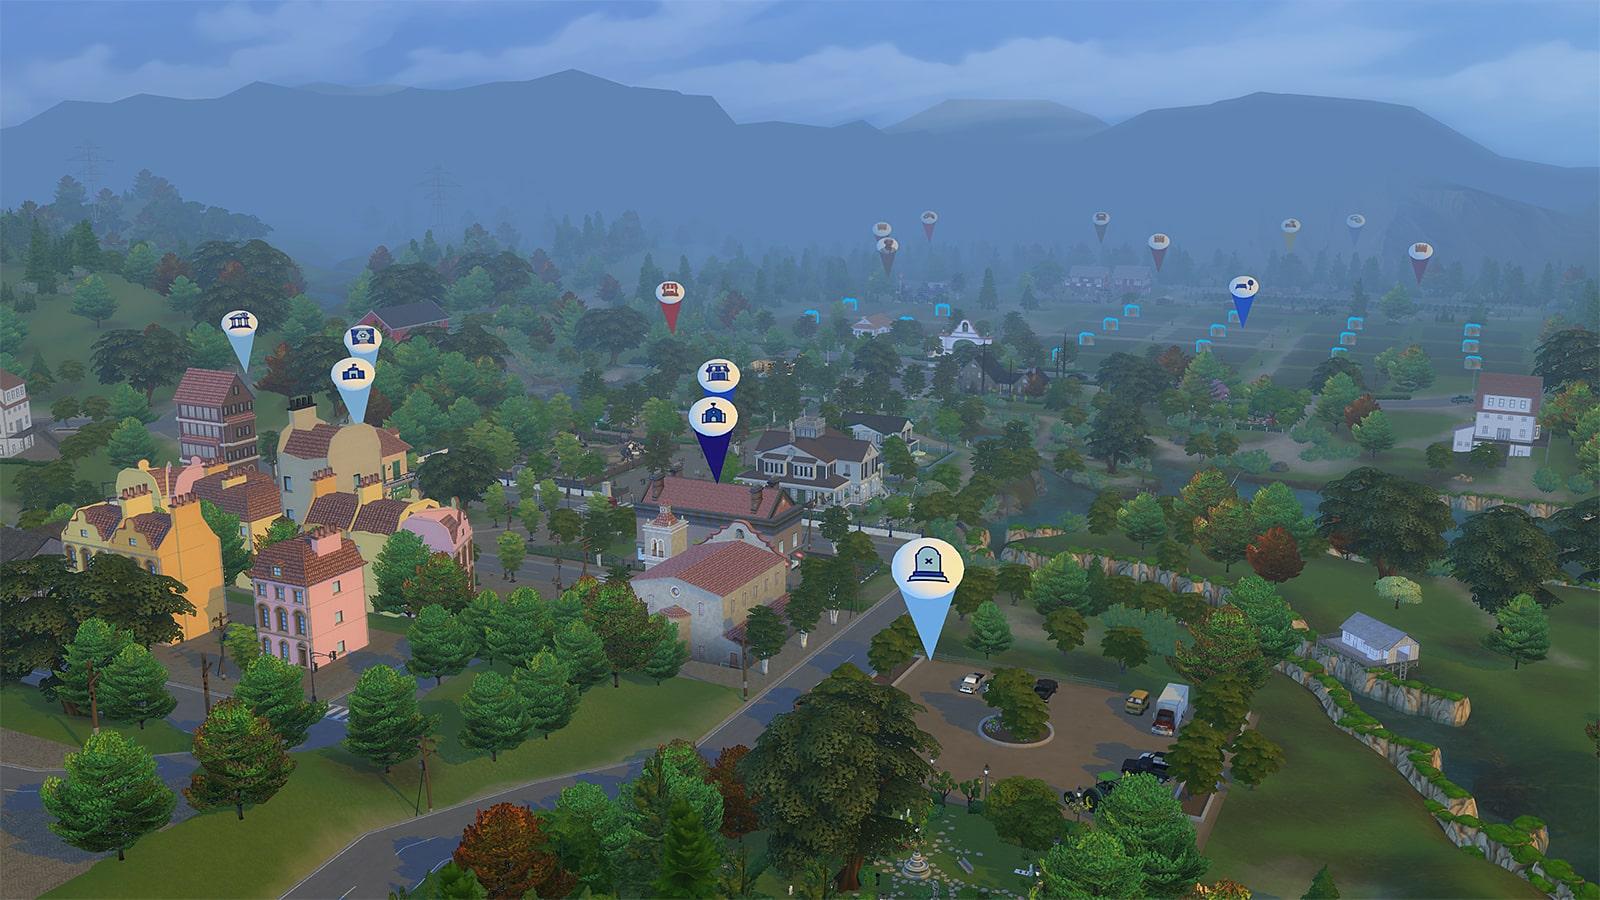 19 Best Sims 4 Graphics Mods and CCs for Free in 2023: Upgrade Your Game  Today